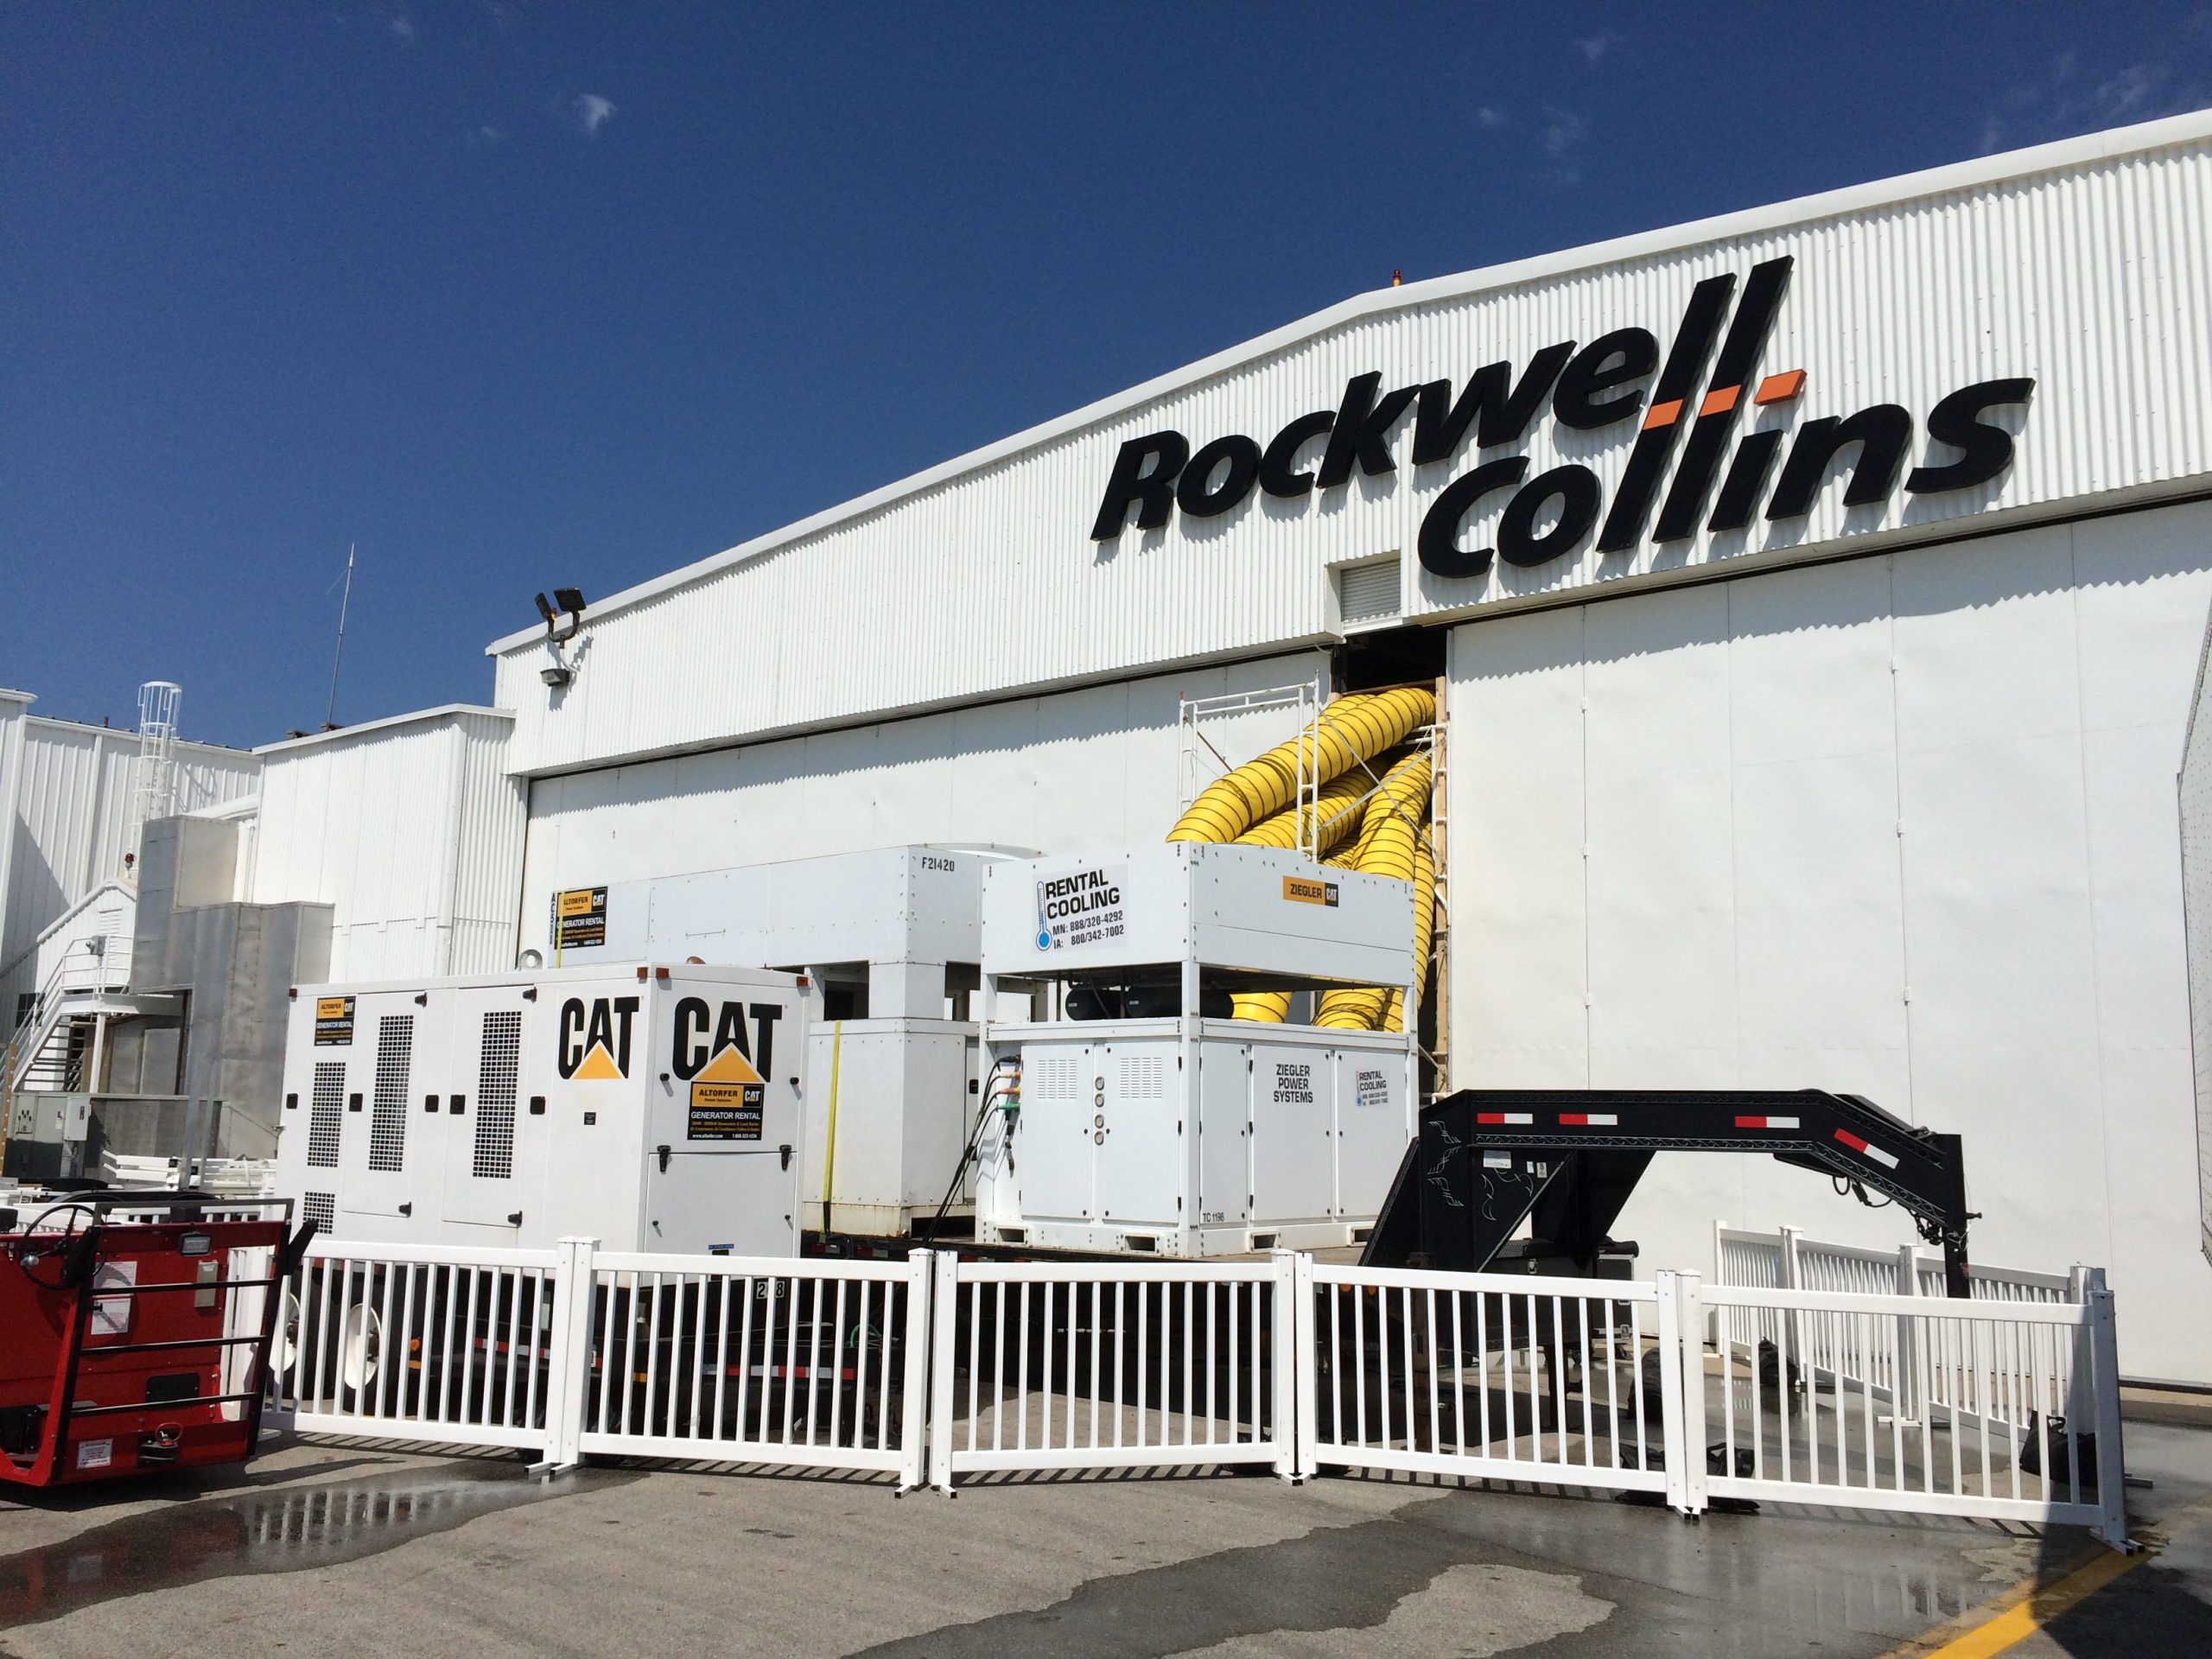 Rush HVAC event Air Conditioning for Rockwell Collins